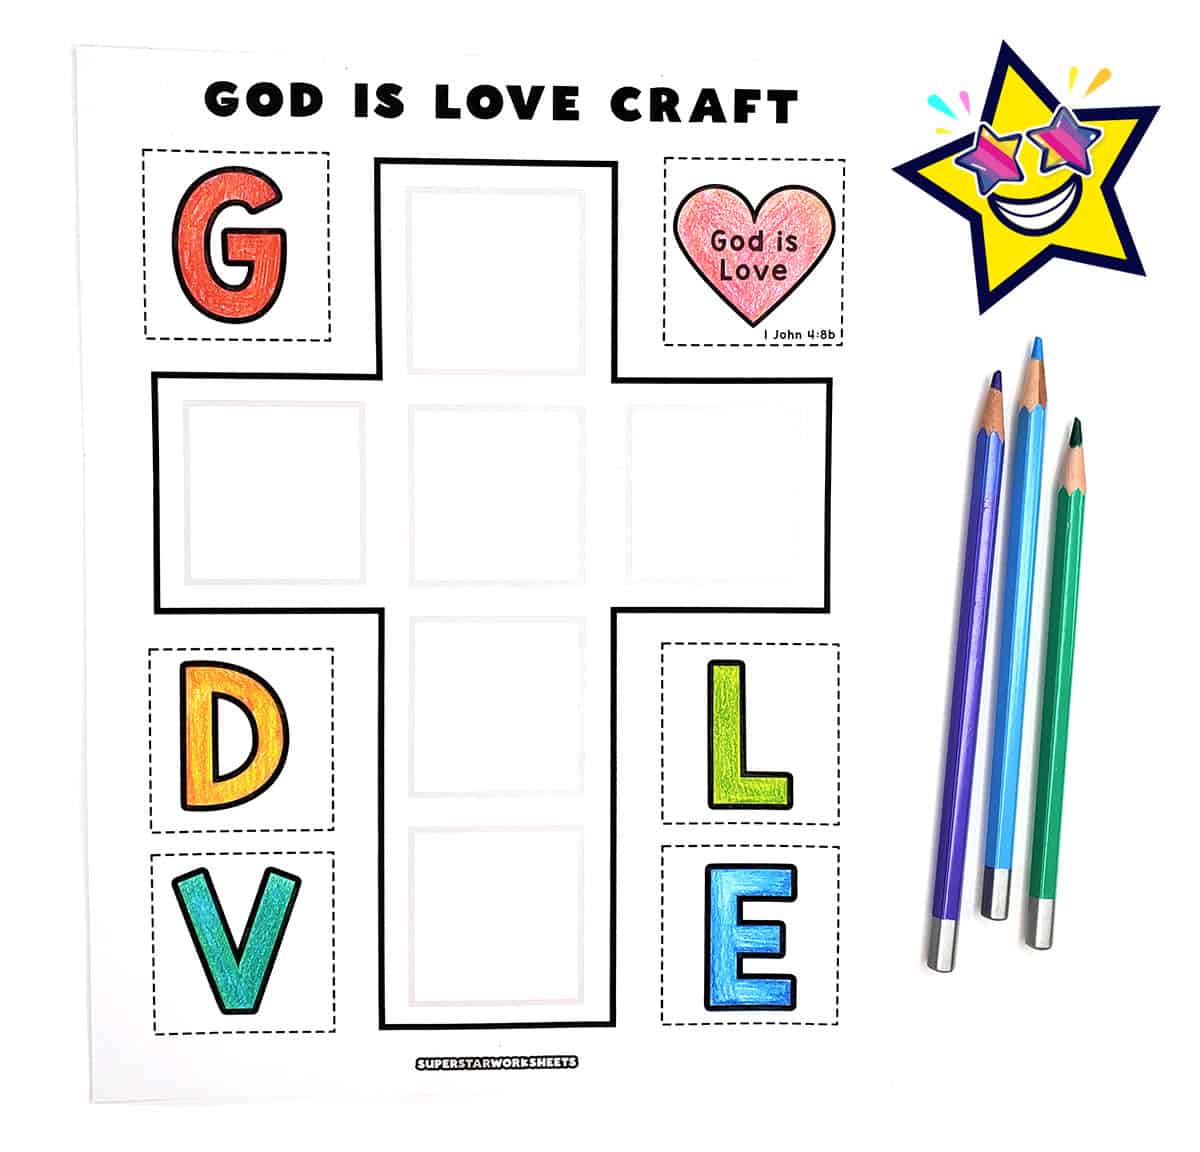 2 Simple Sunday School Crafts -Easy Fish Crafts with Bible Verses